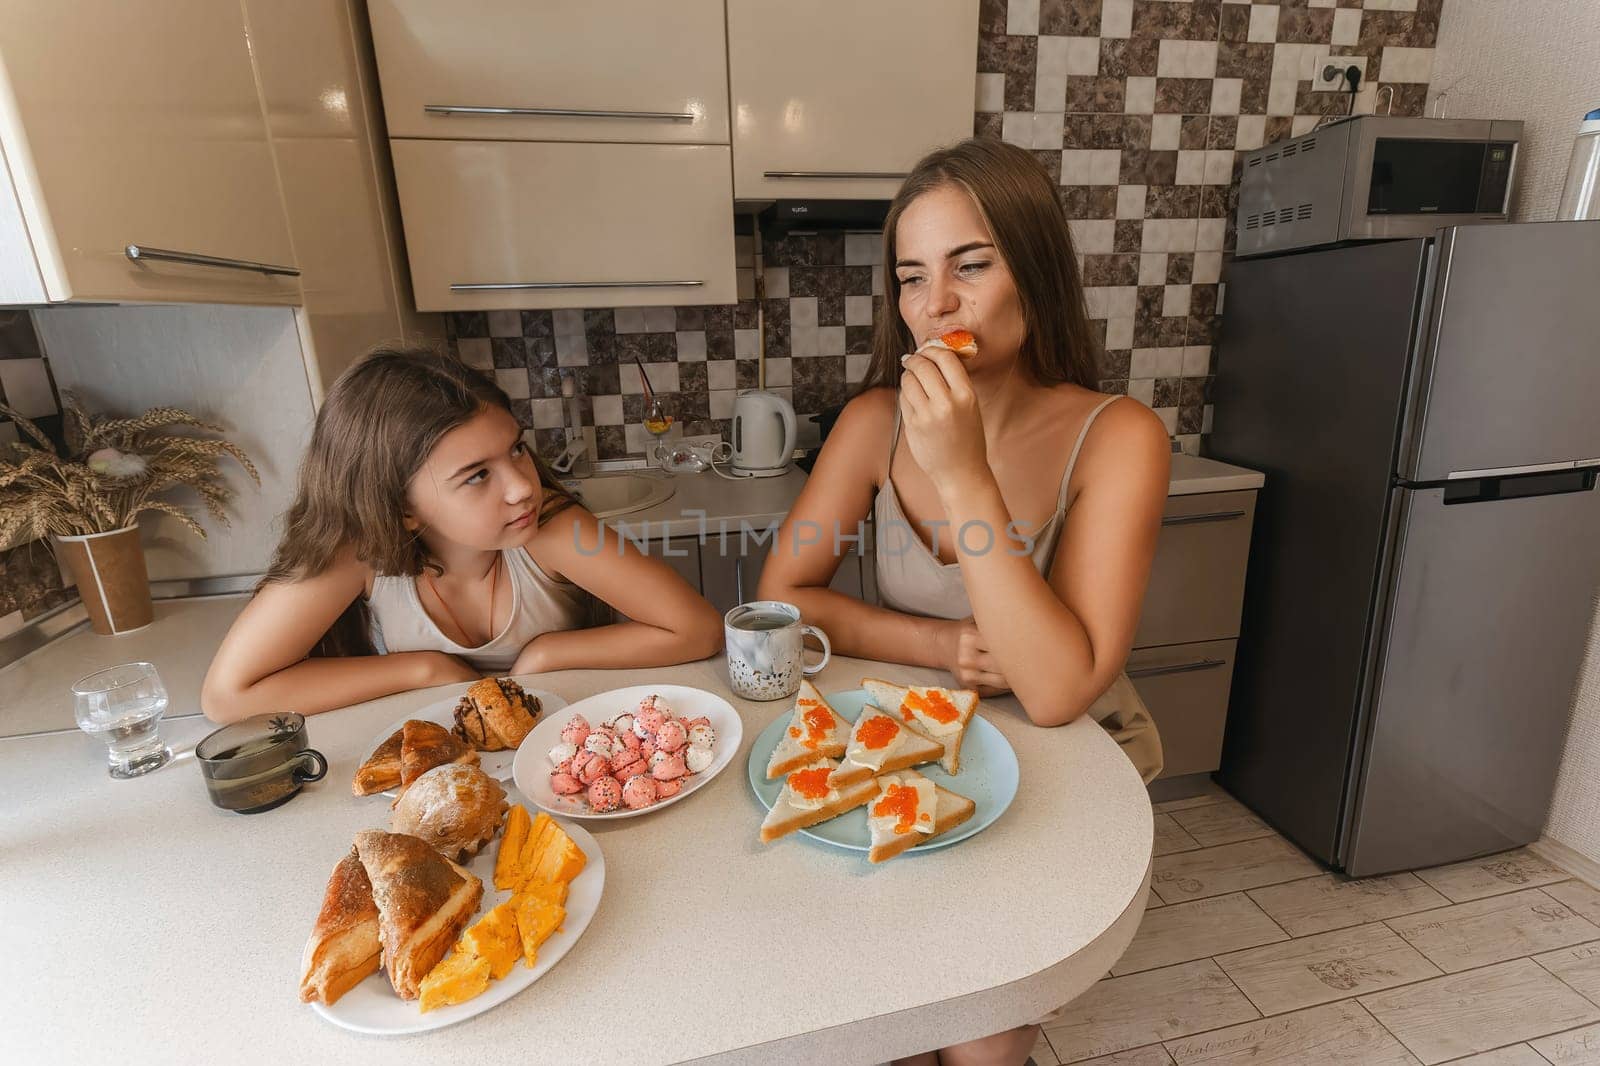 mom and daughter sitting at a table with a variety of food, including sandwiches, fruit, and pastries. They are smiling and enjoying their meal together. by Matiunina